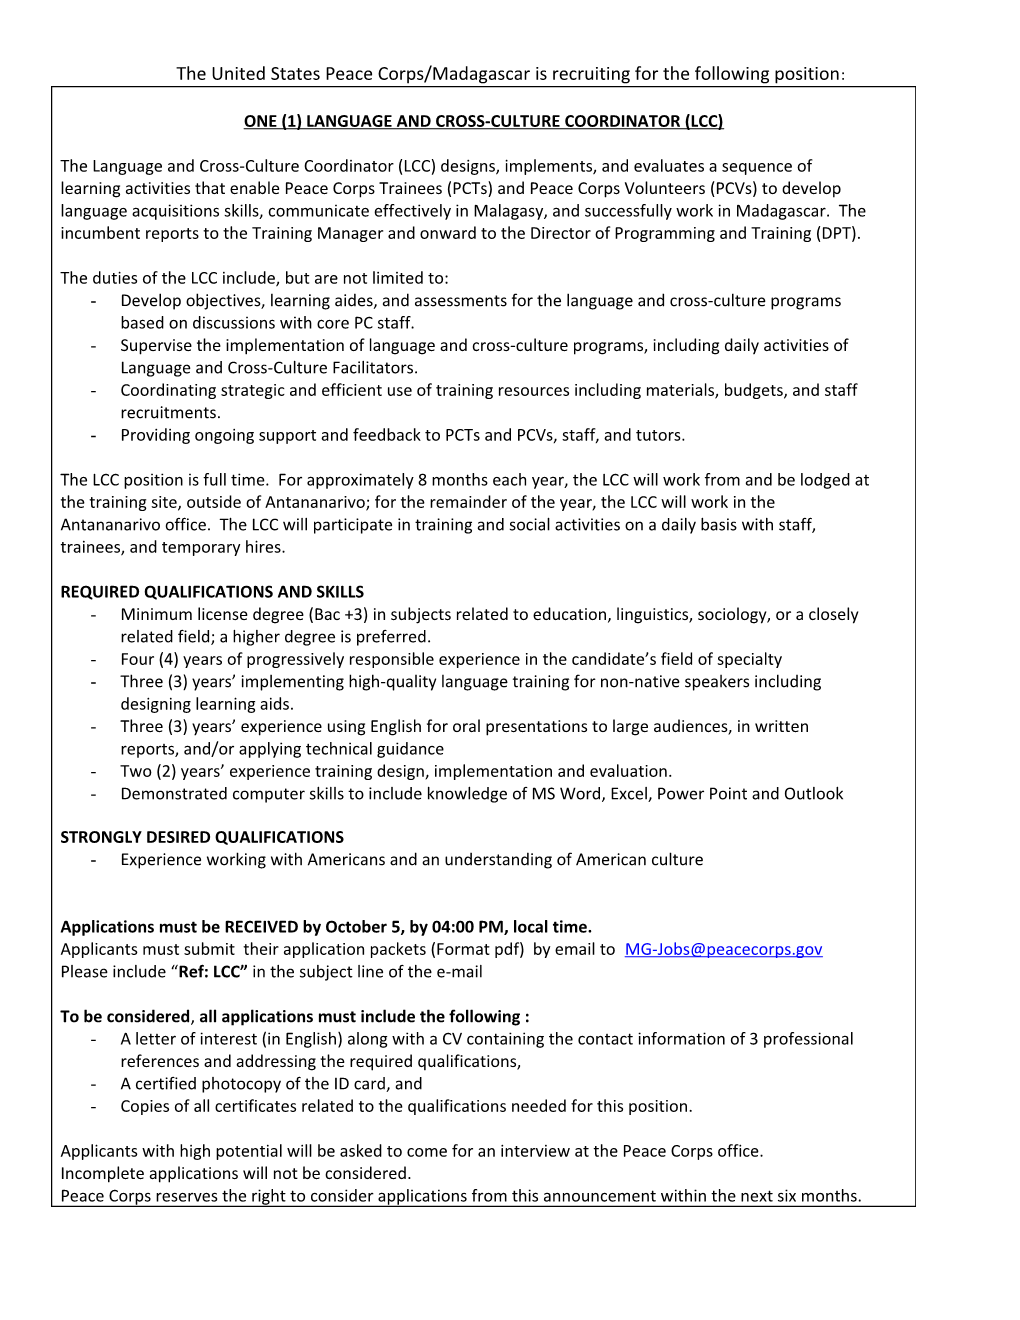 The United States Peace Corps/Madagascar Is Recruiting for the Following Position